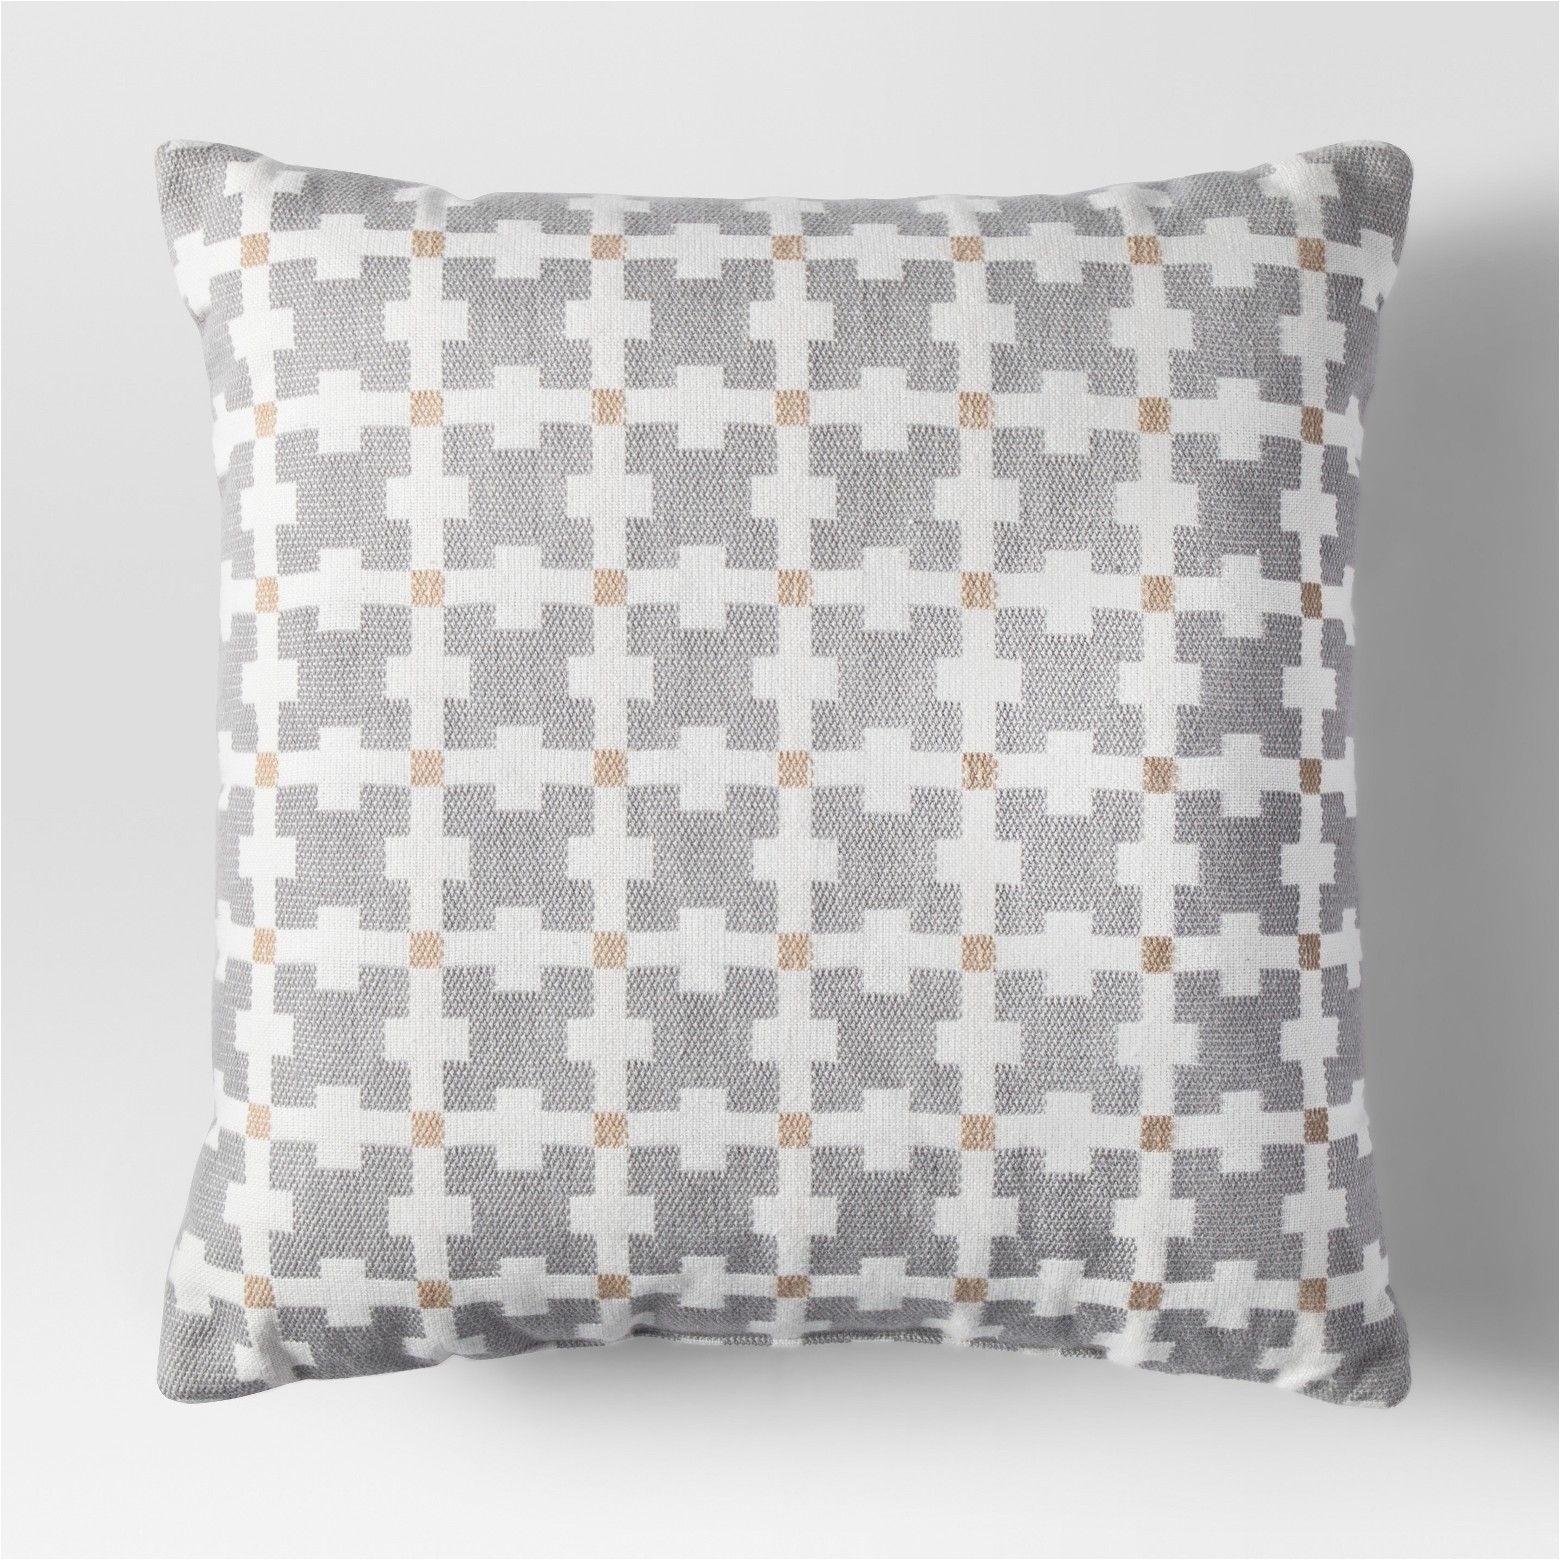 patterned throw pillow 18 gray white project 62a¢